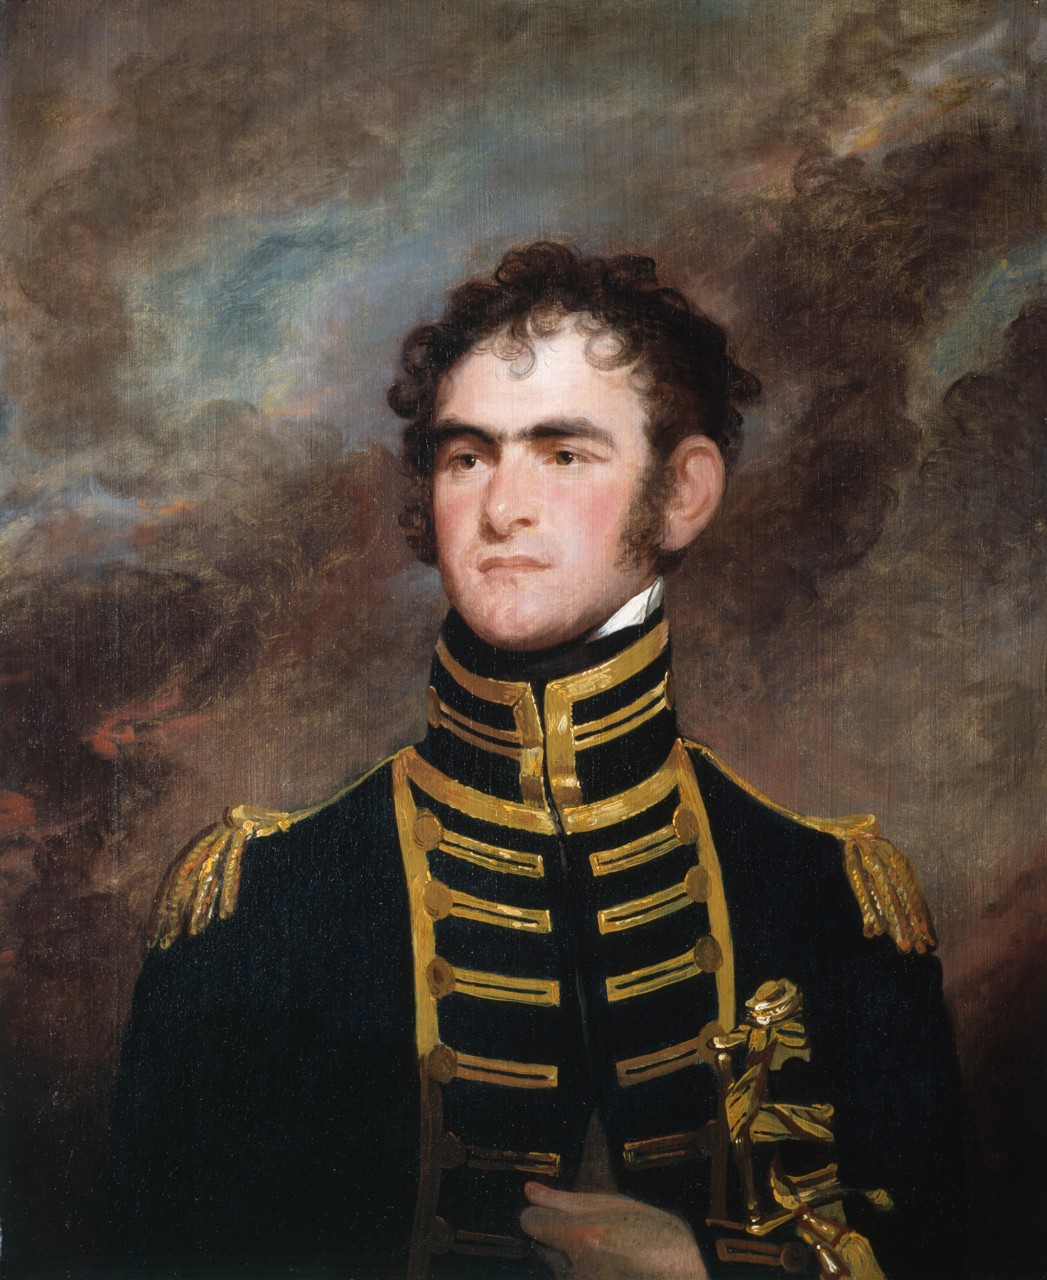 Portrait of John Rodgers he is holding a sword in his left hand there is smoke in the background